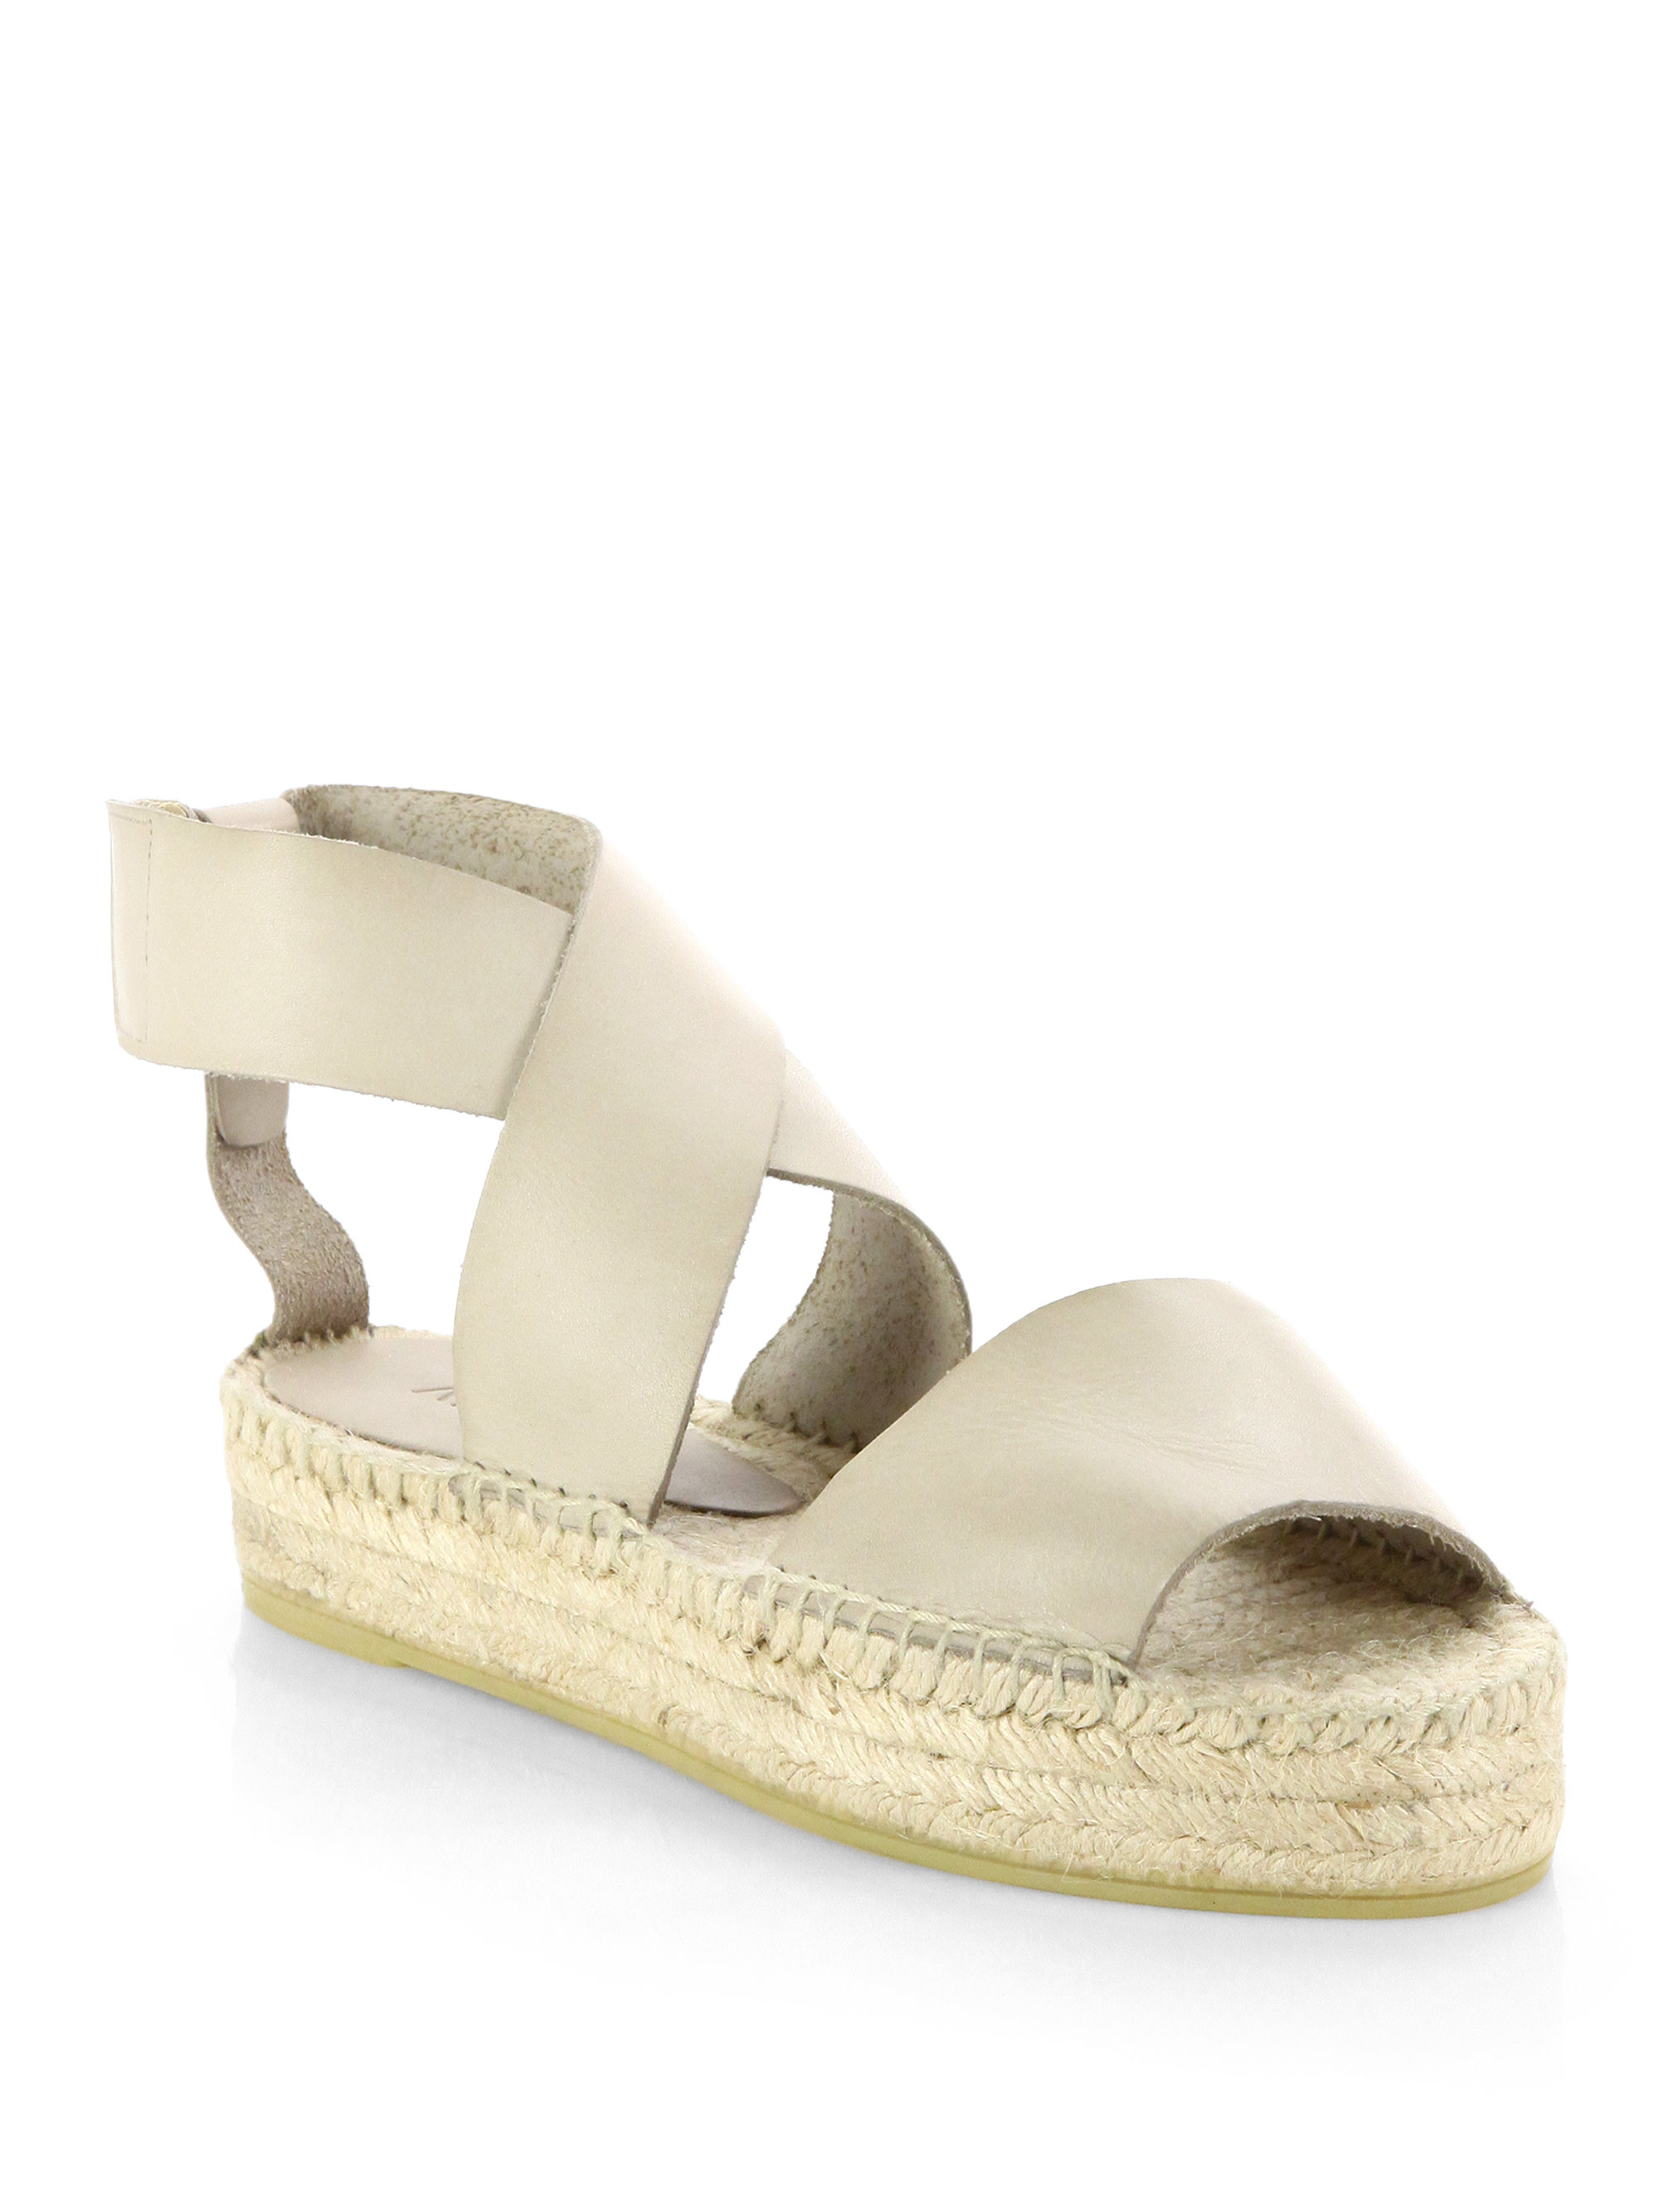 Vince Elise Leather Espadrille Sandals in Beige (LUGGAGE) | Lyst